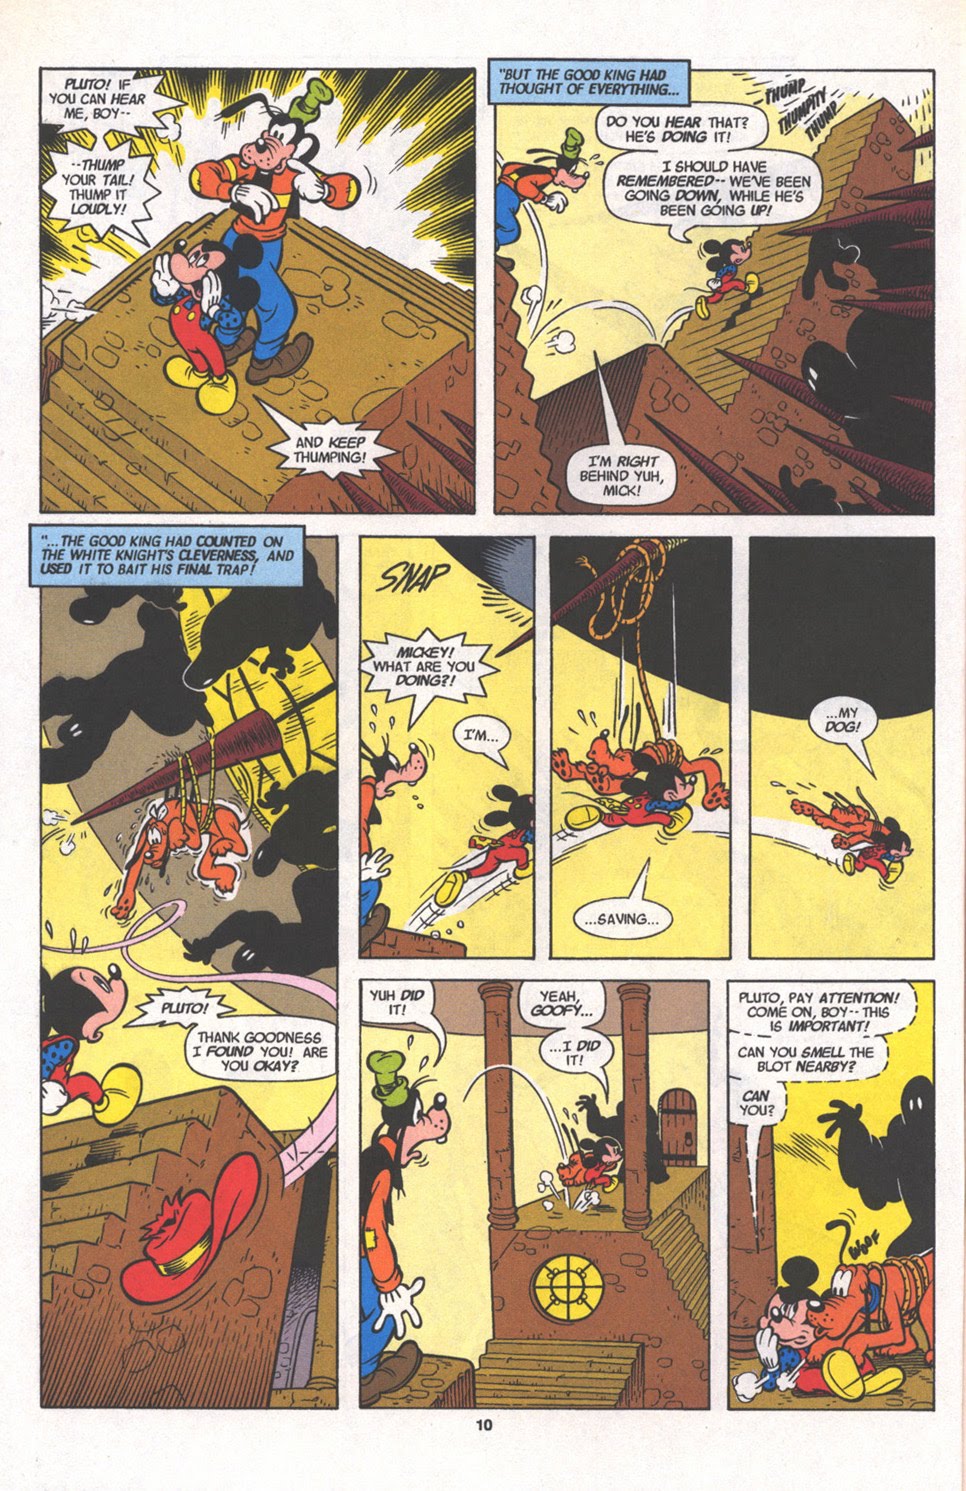 [Mickey+Mouse+Adventures+008+page+14.jpg]